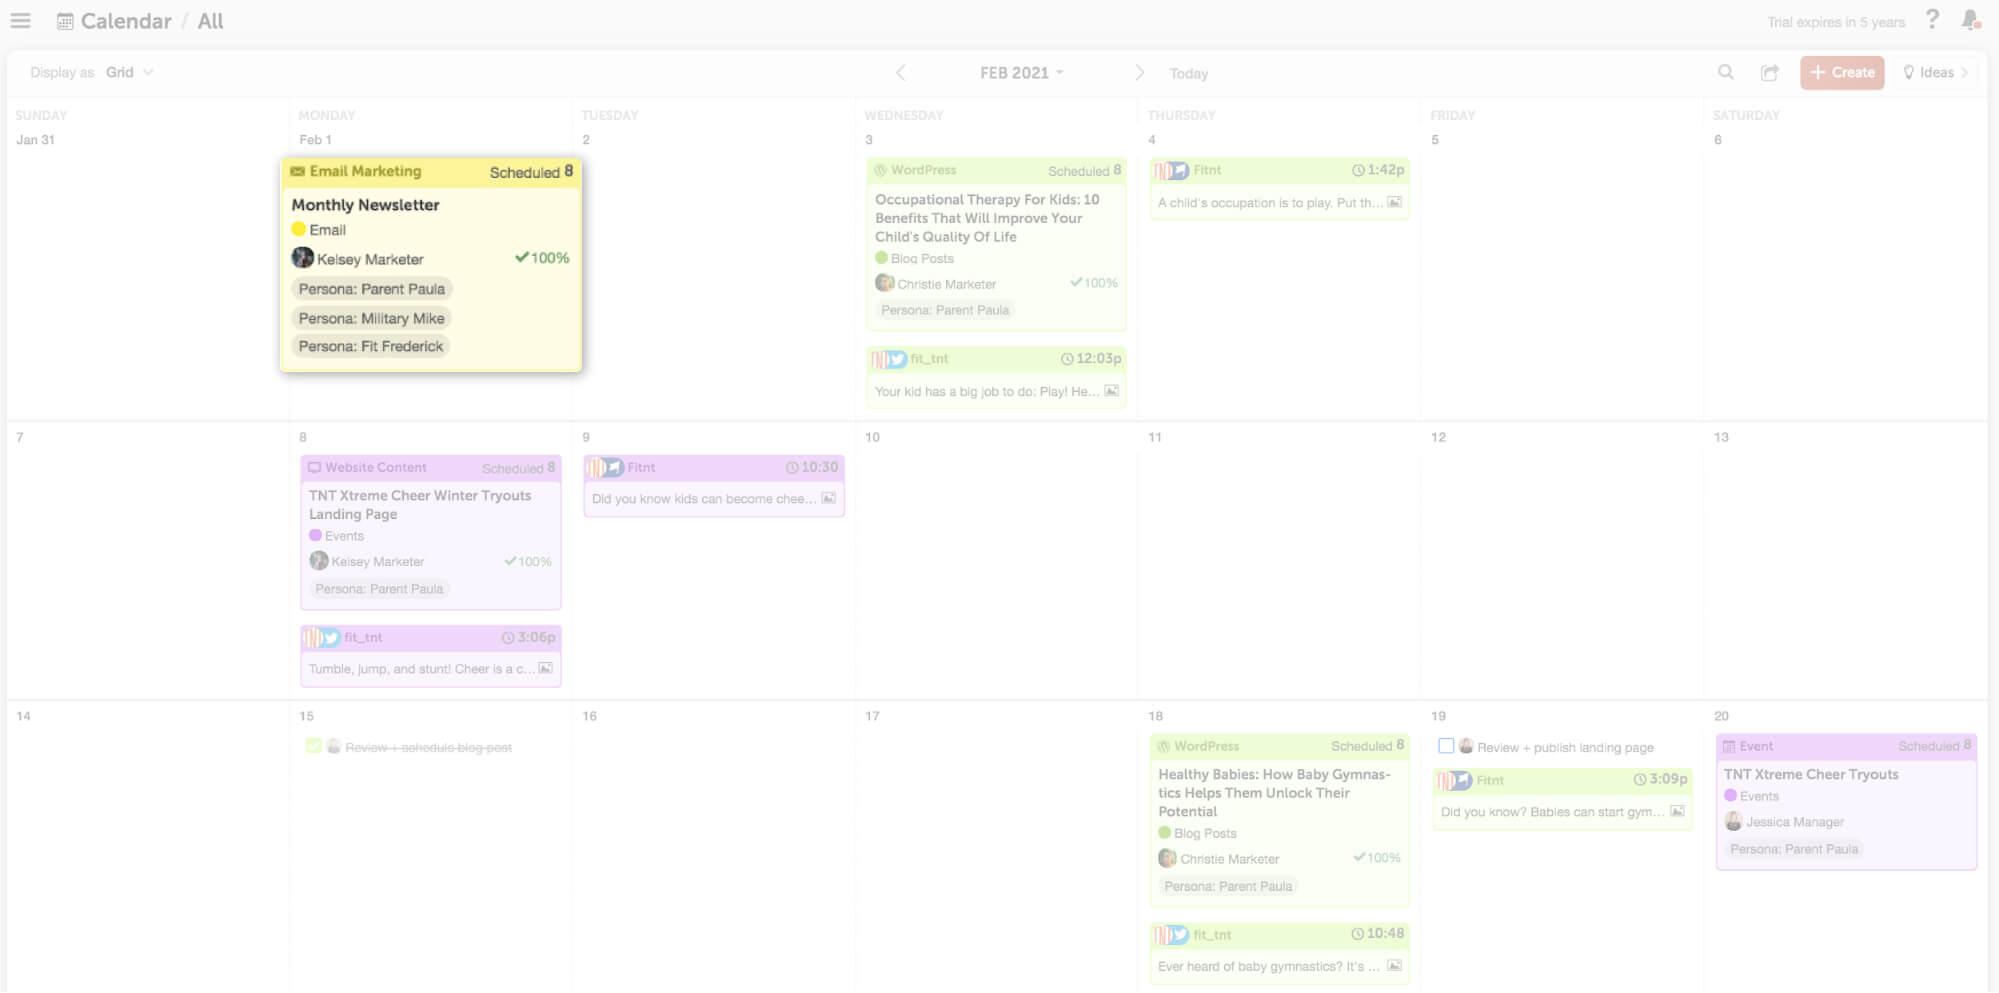 schedule projects the day they'll publish